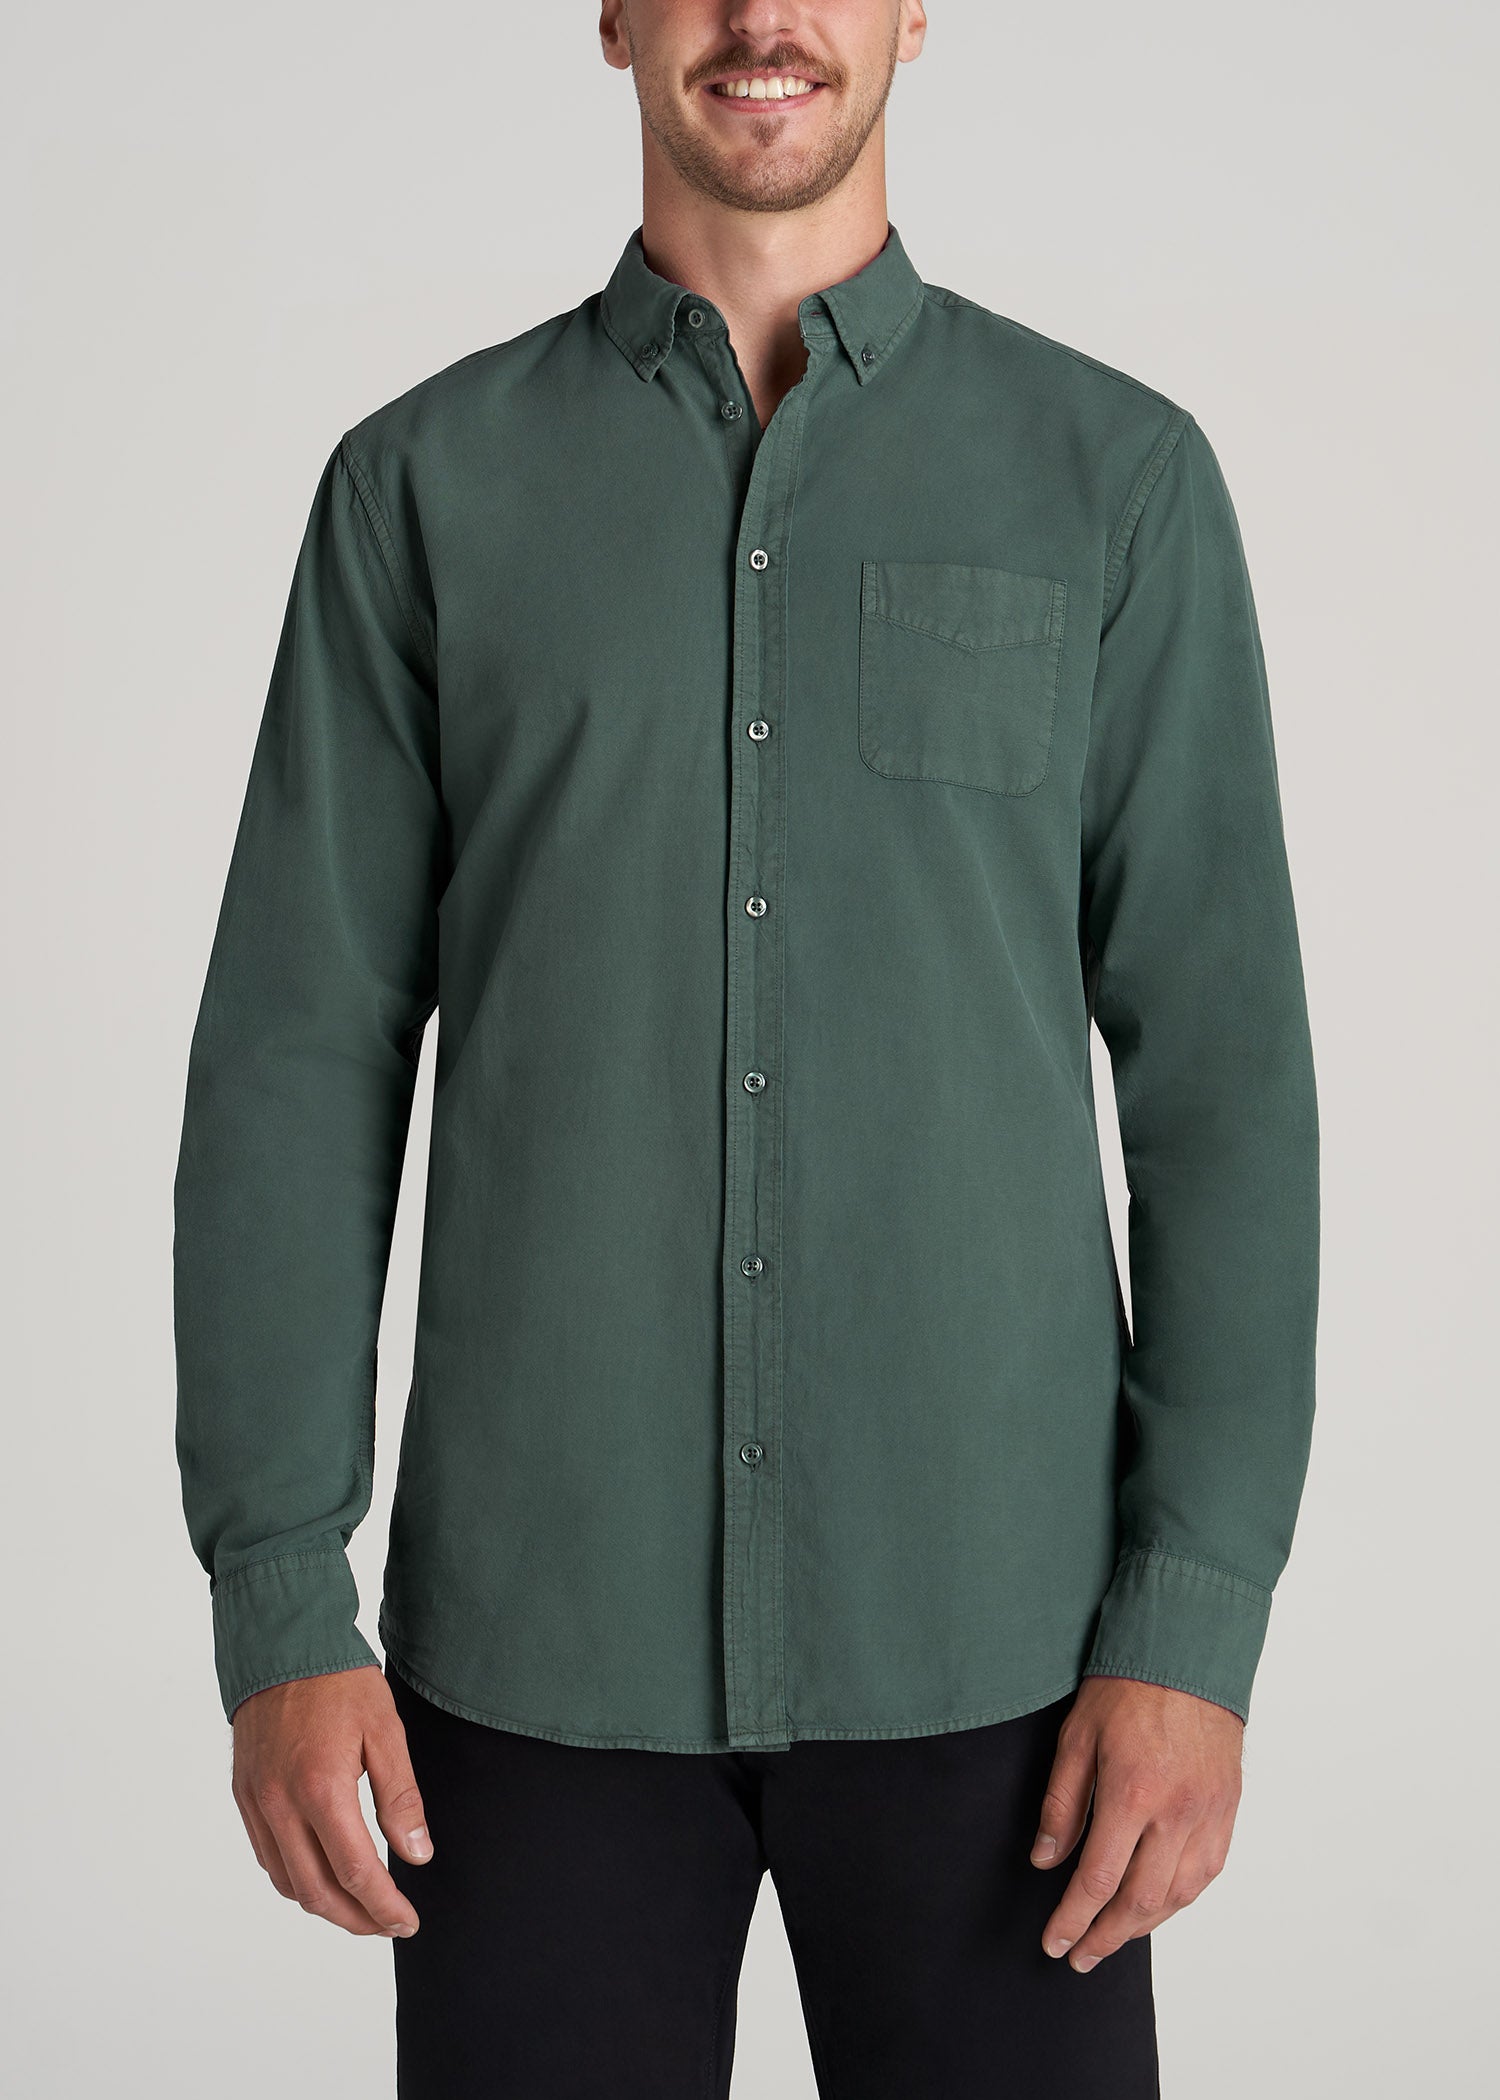 Washed Oxford Shirt for Tall Men in Timber Green